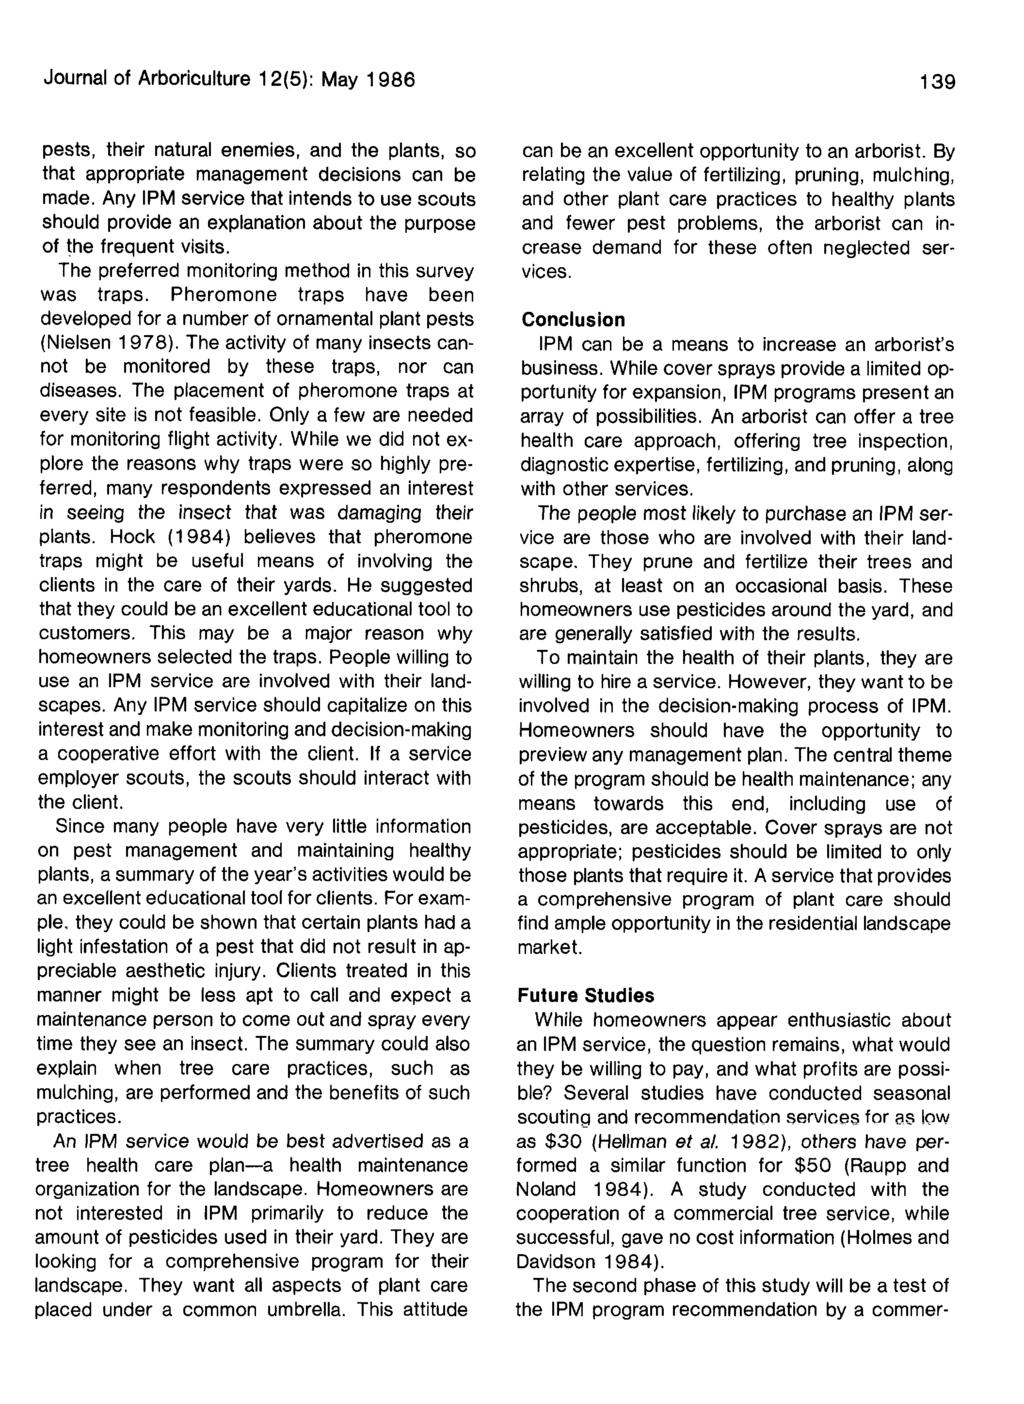 Journal of Arboriculture 12(5): May 1986 139 pests, their natural enemies, and the plants, so that appropriate management decisions can be made.